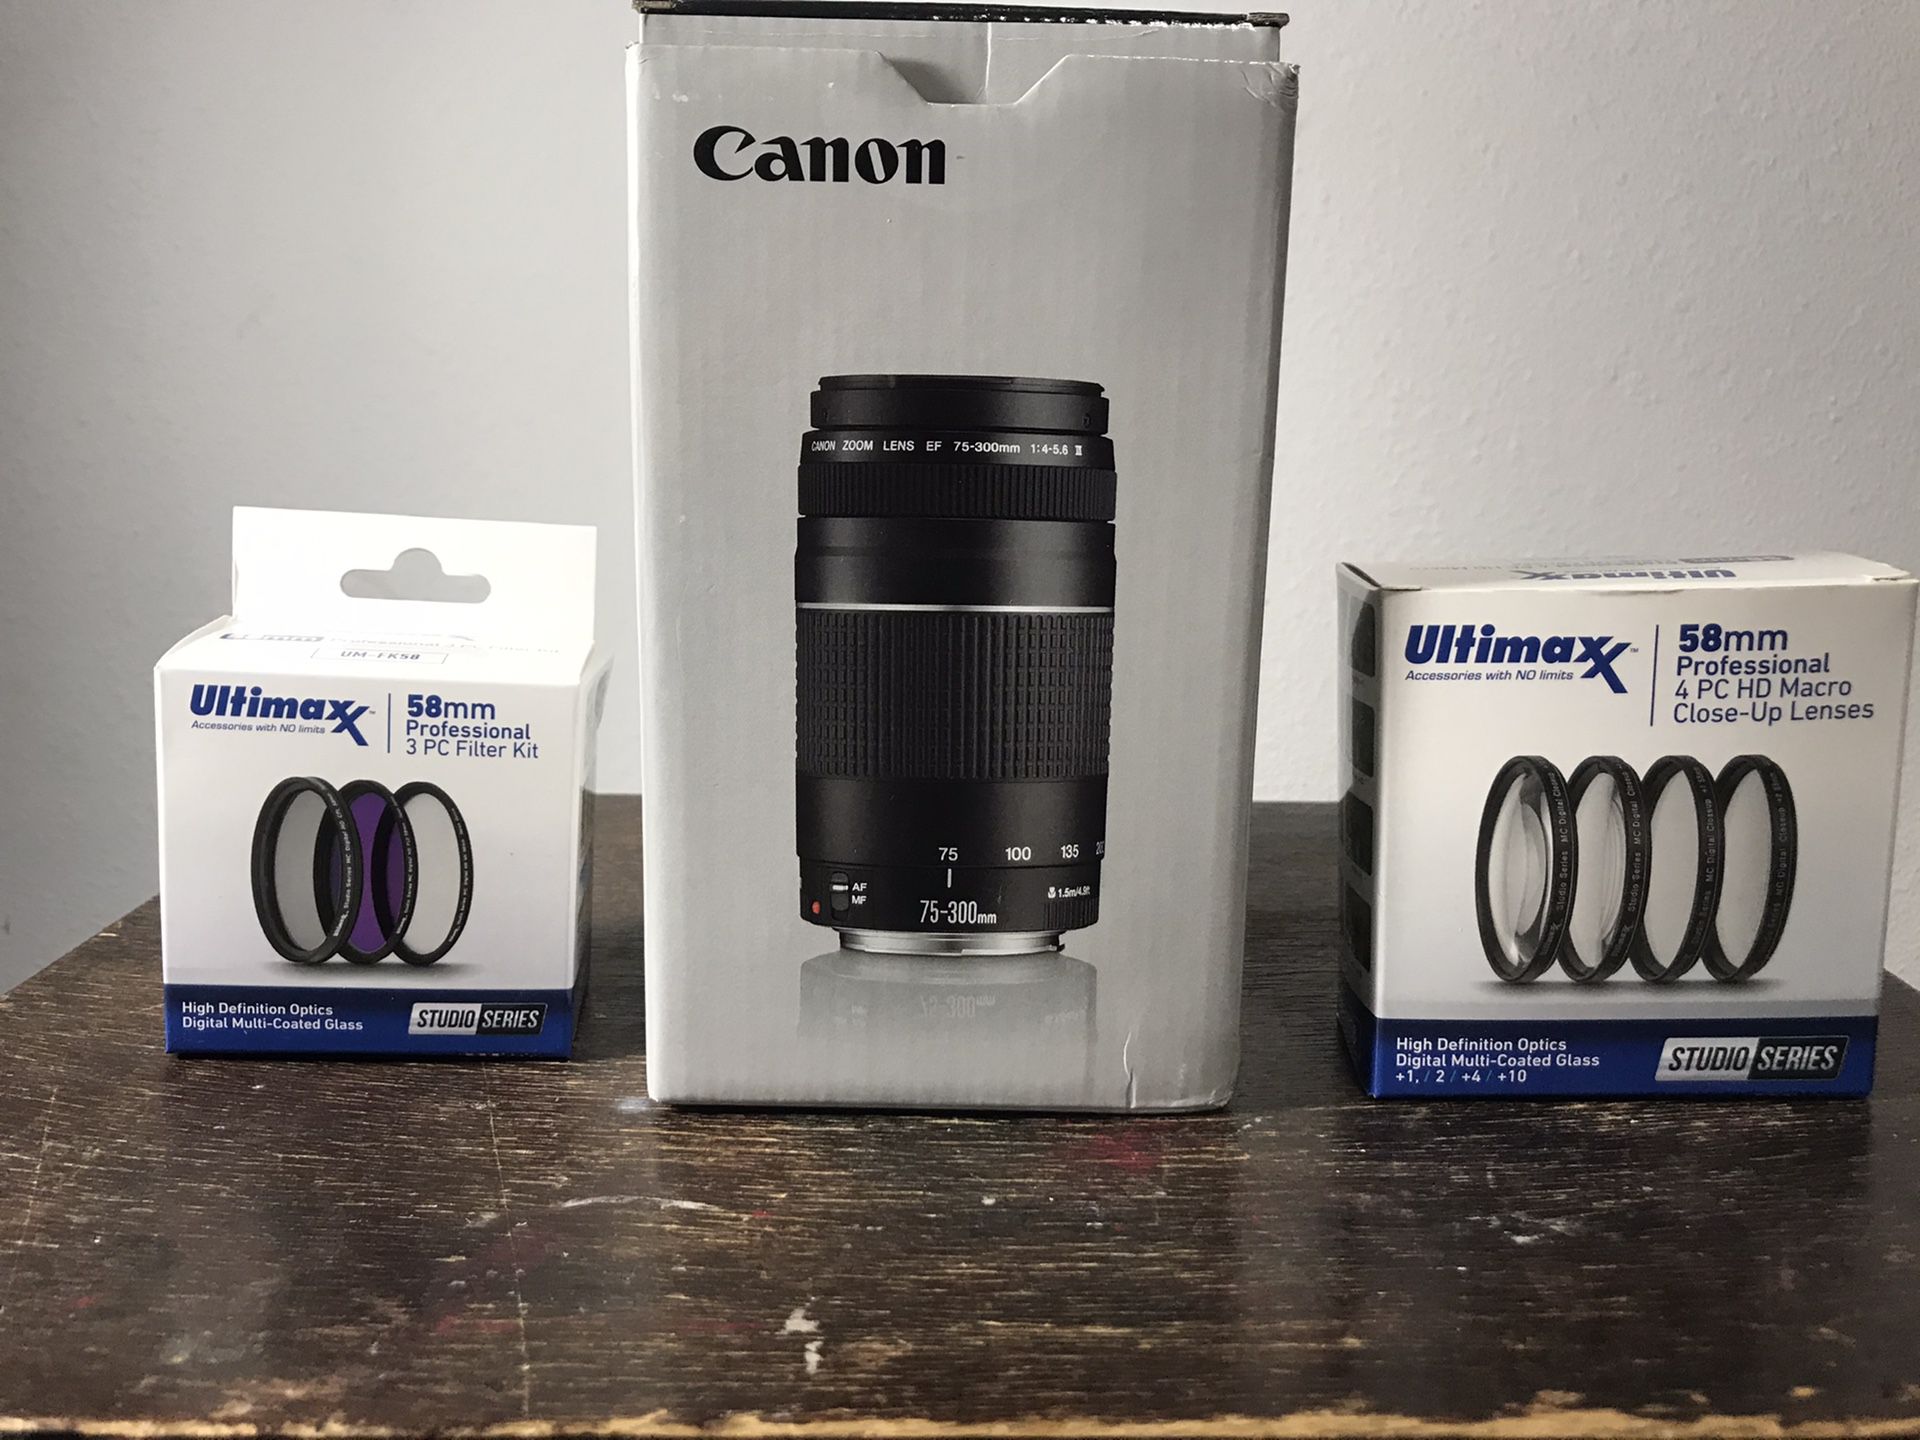 Canon EF 75-300mm f/4-5.6 III w/3 58mm Profesional 3 PC Filter Kit & 58mm Professional 4 PC HD Macro Close-Up Lenses and Lens hood